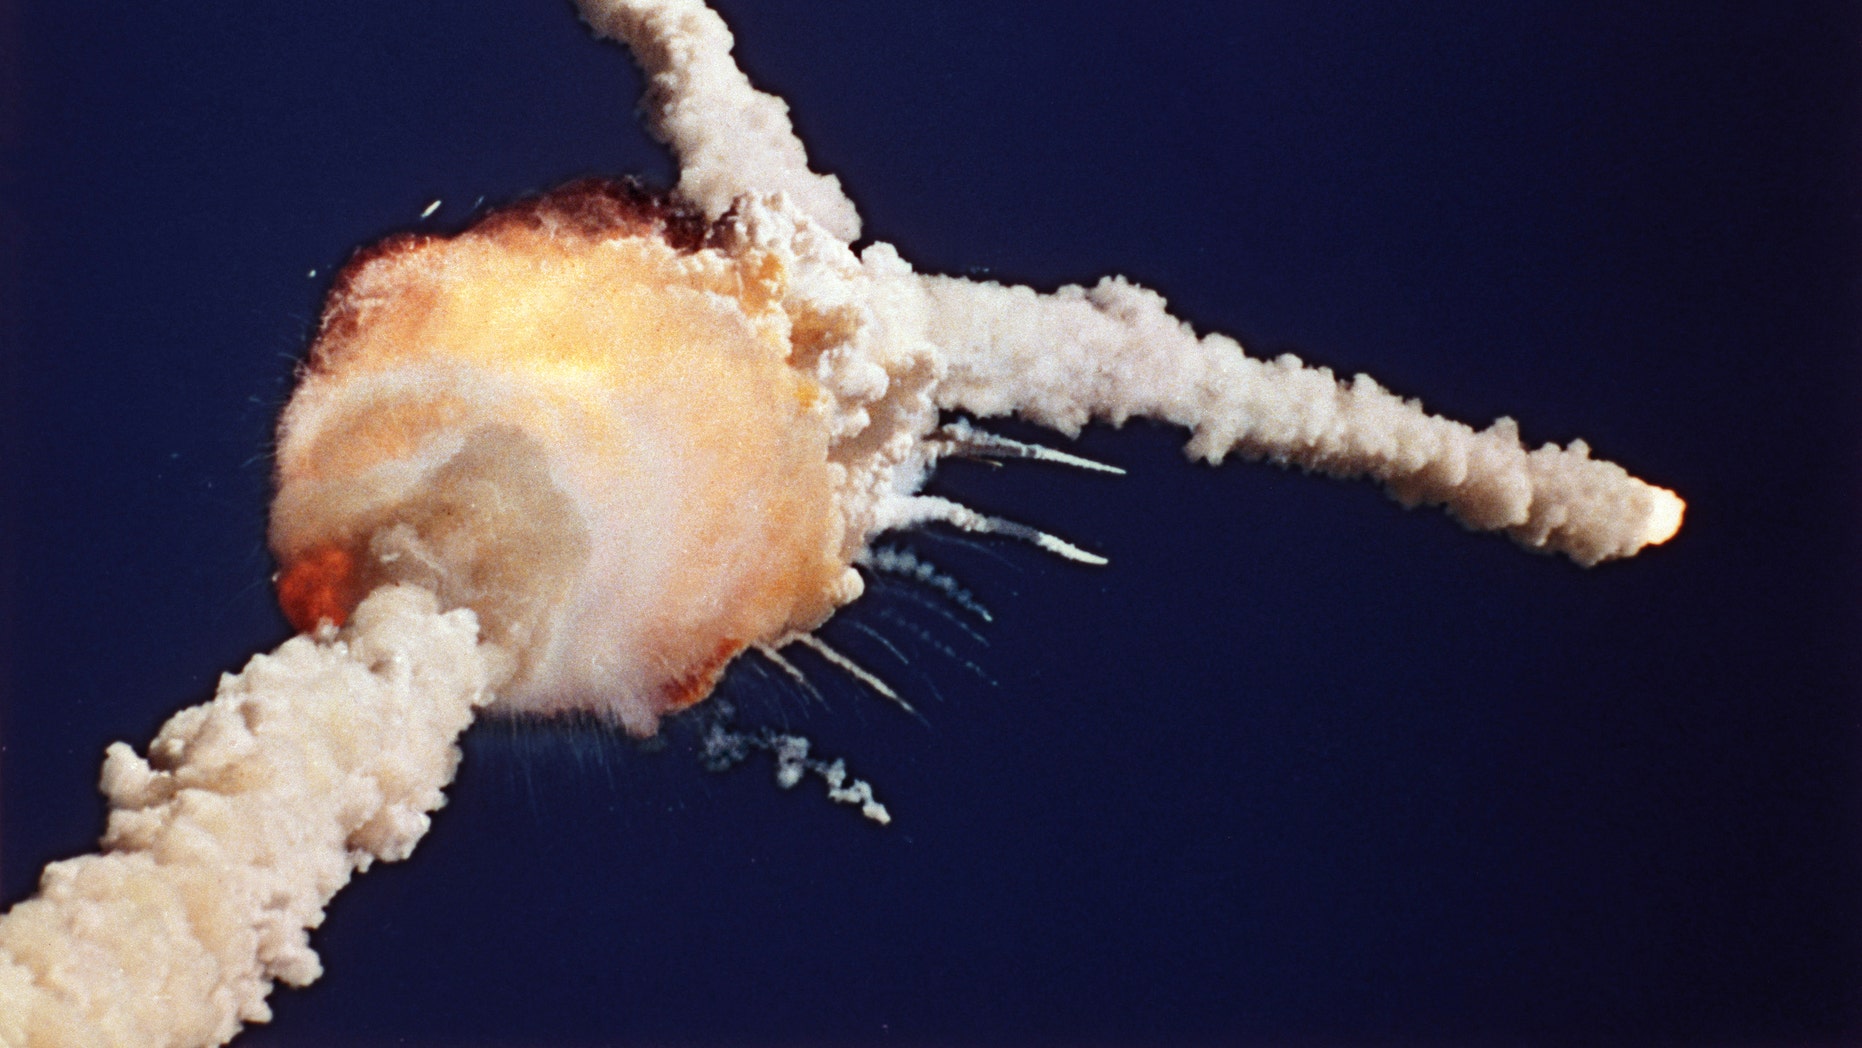 nasa space shuttle accidents